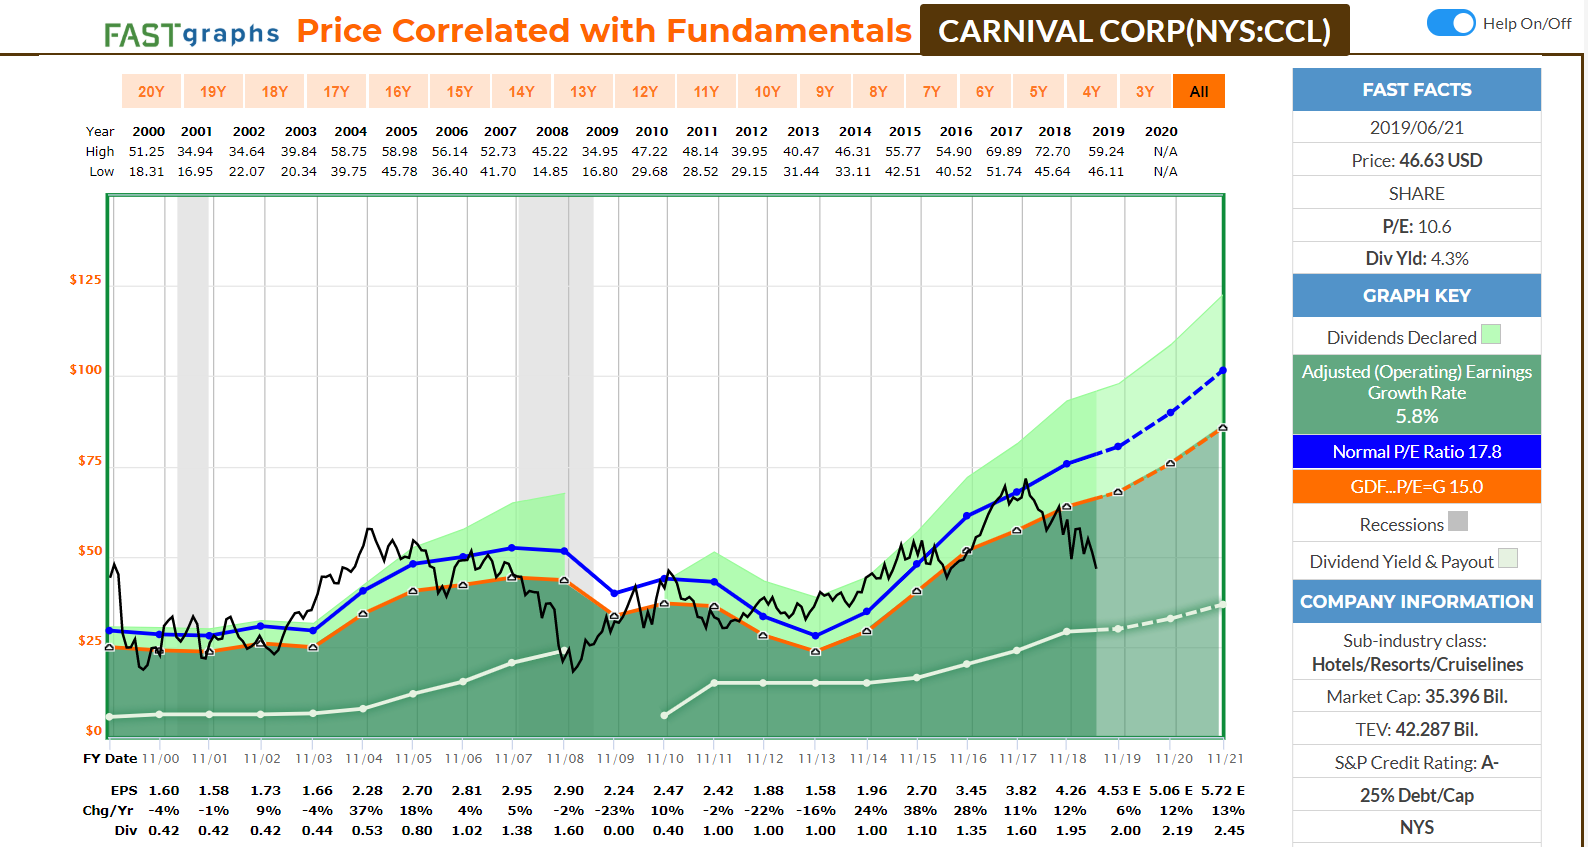 carnival cruise line dividend history